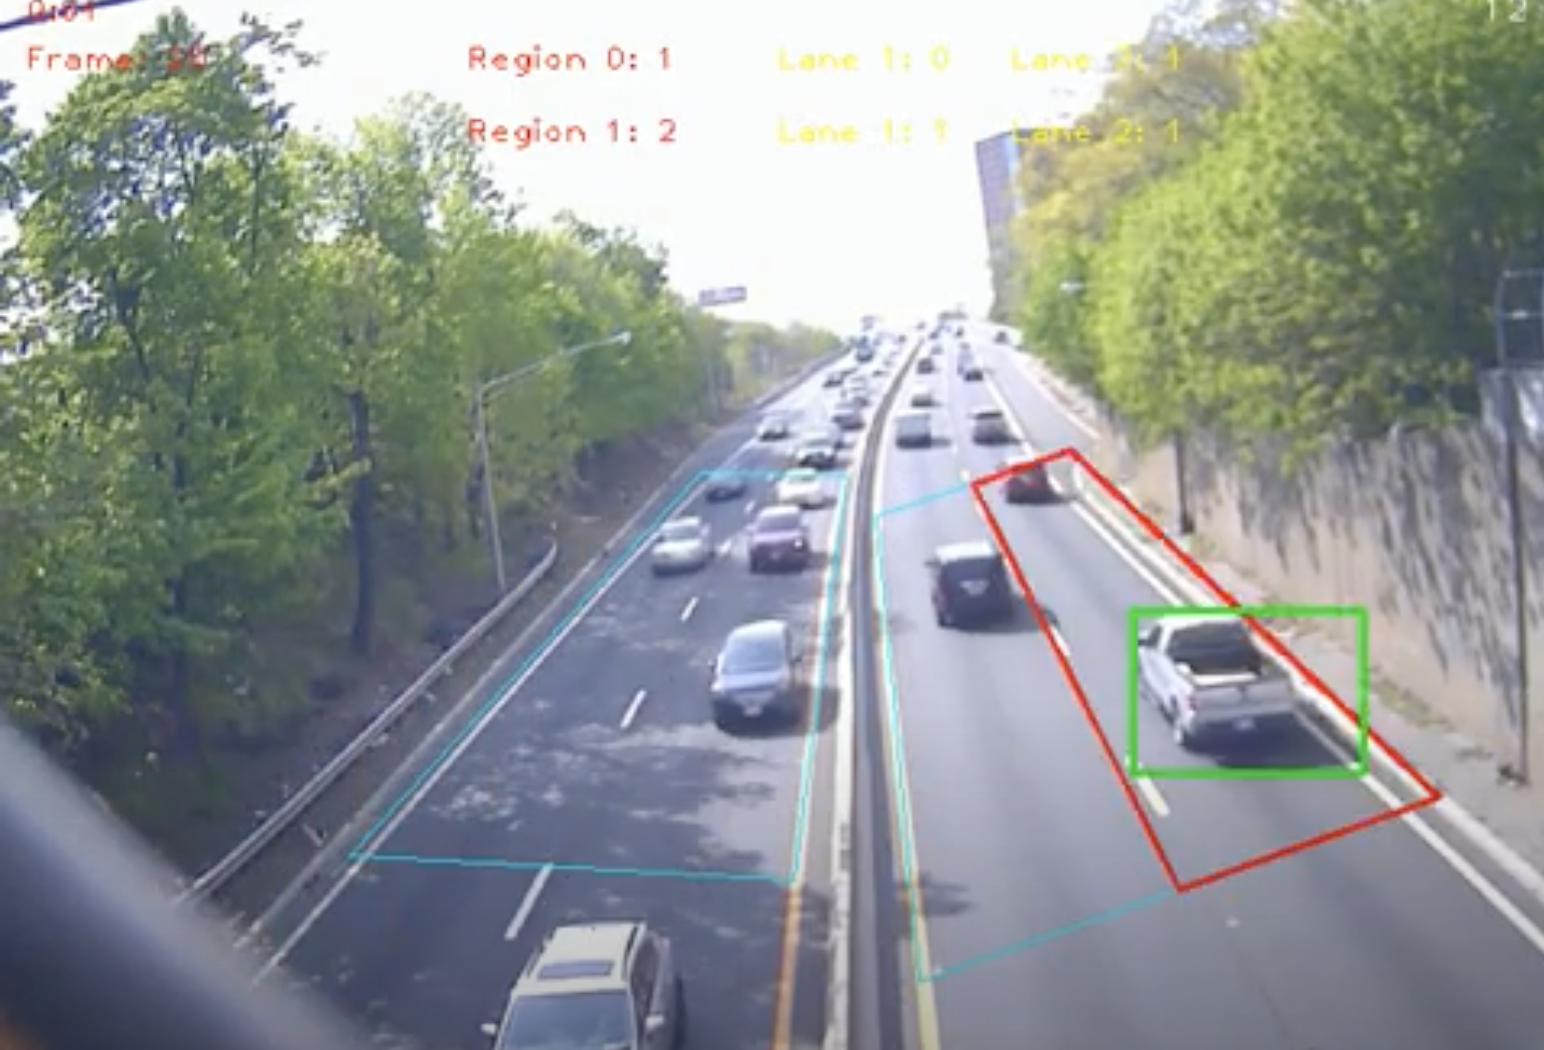 Video image of interstate highway with bidirectional traffic and AI identifying vehicles using green and red boxes